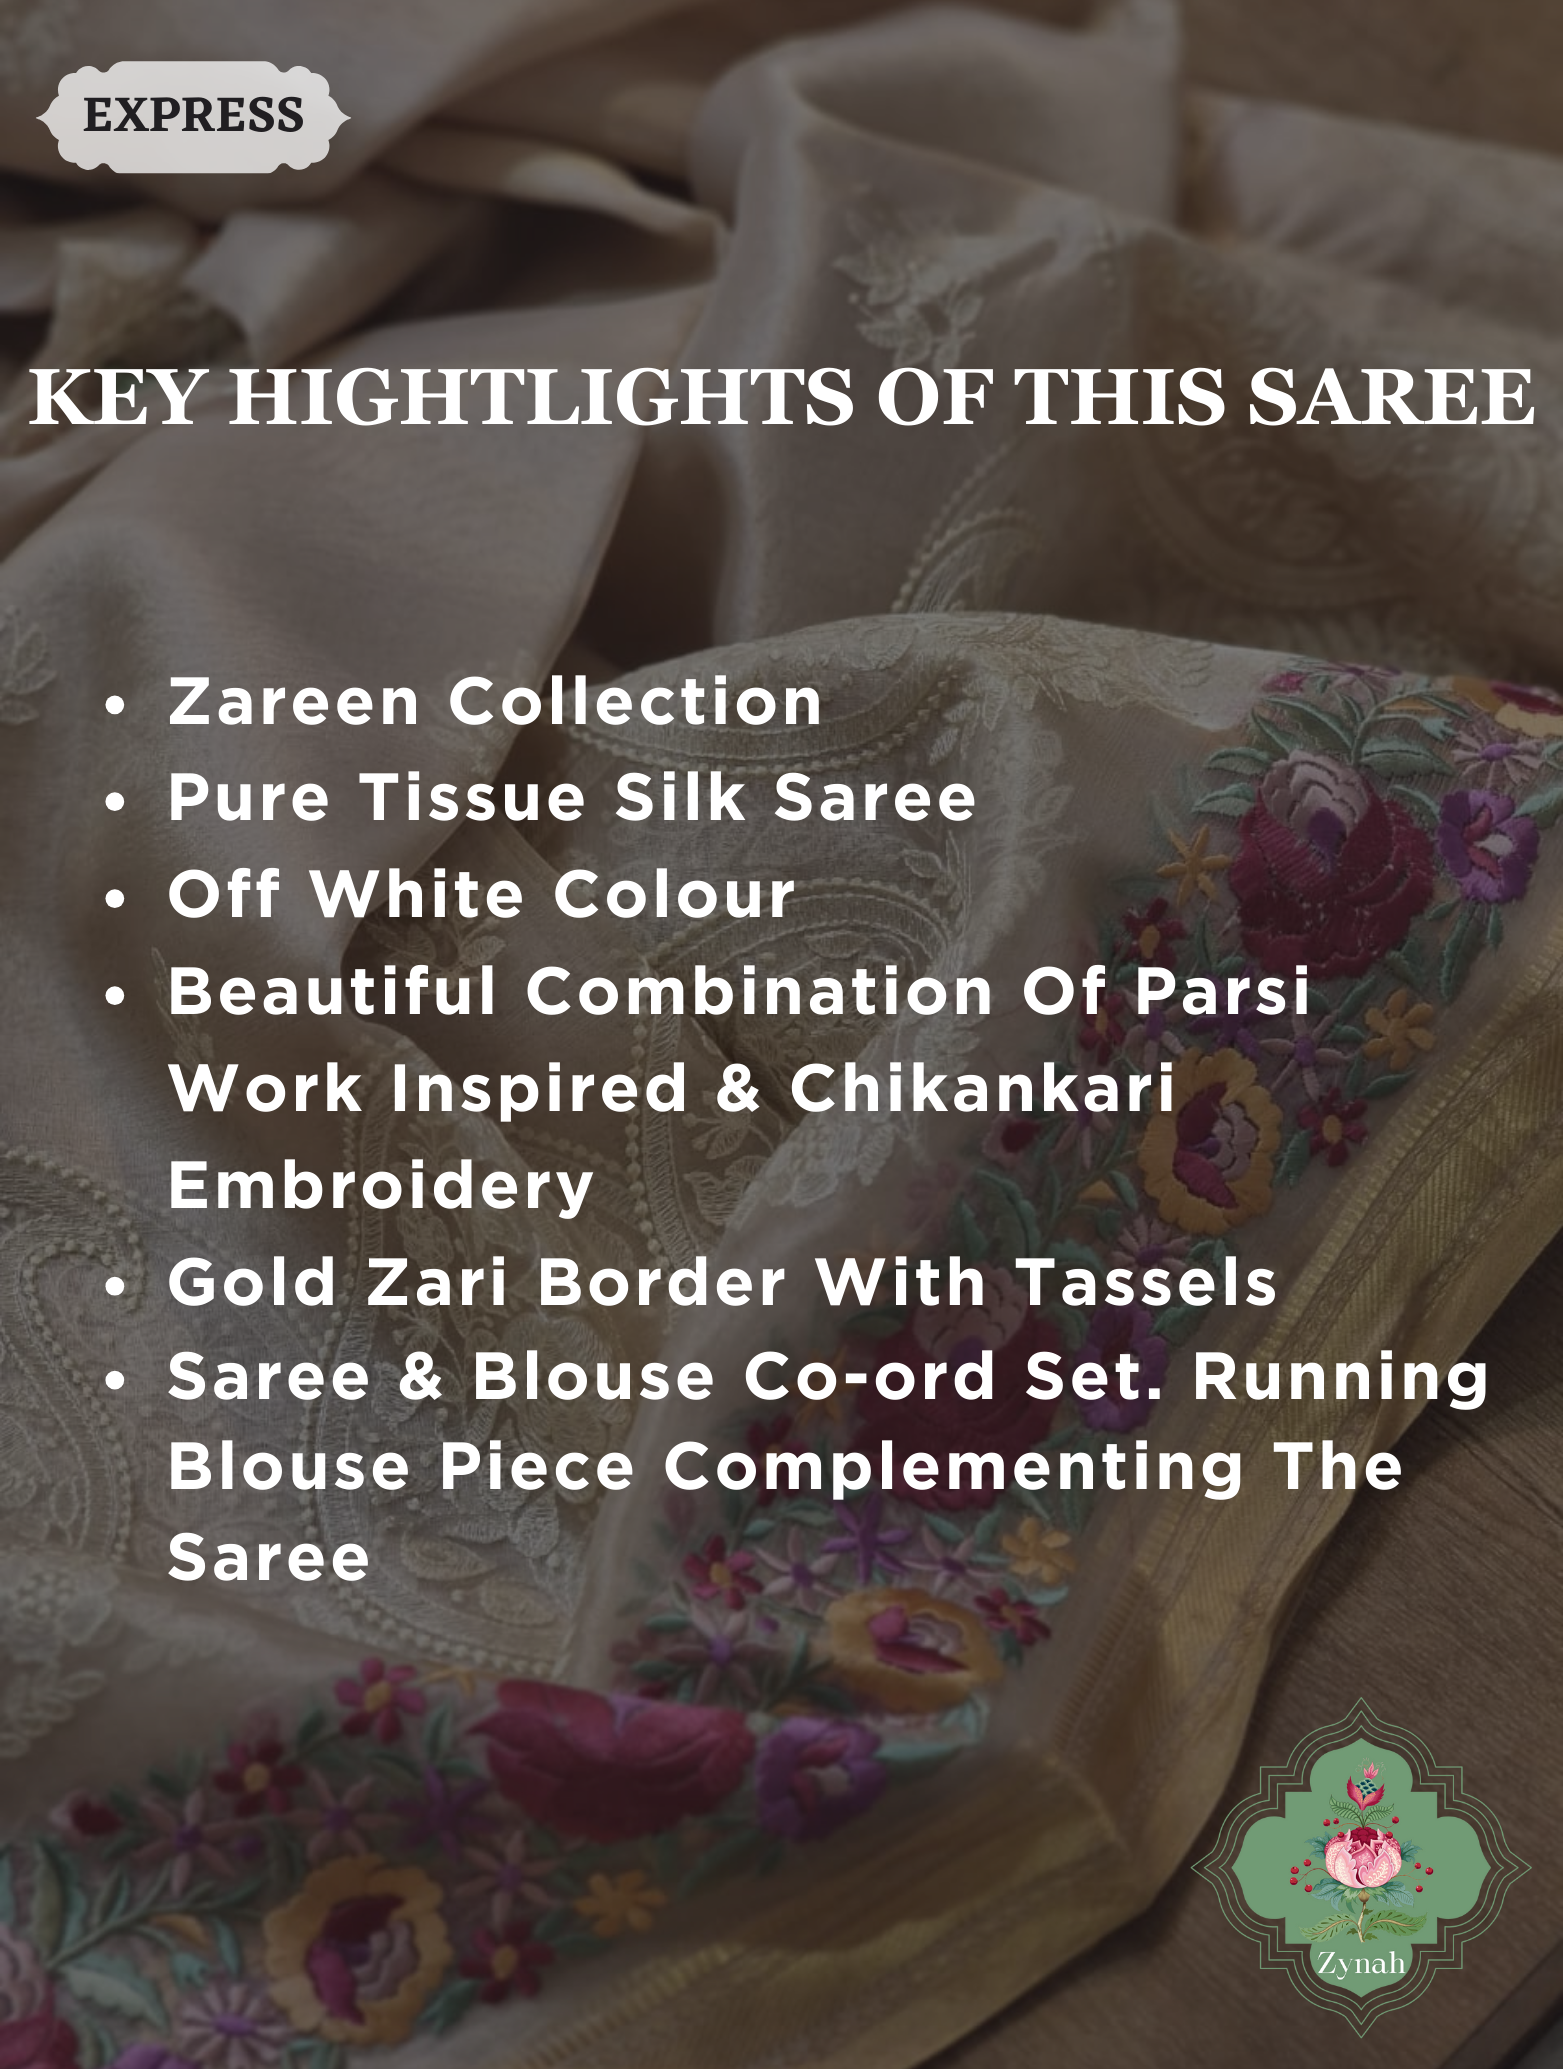 Off White Pure Tissue Silk Saree With Parsi Work & Chikankari Inspired Embroidery On The Border